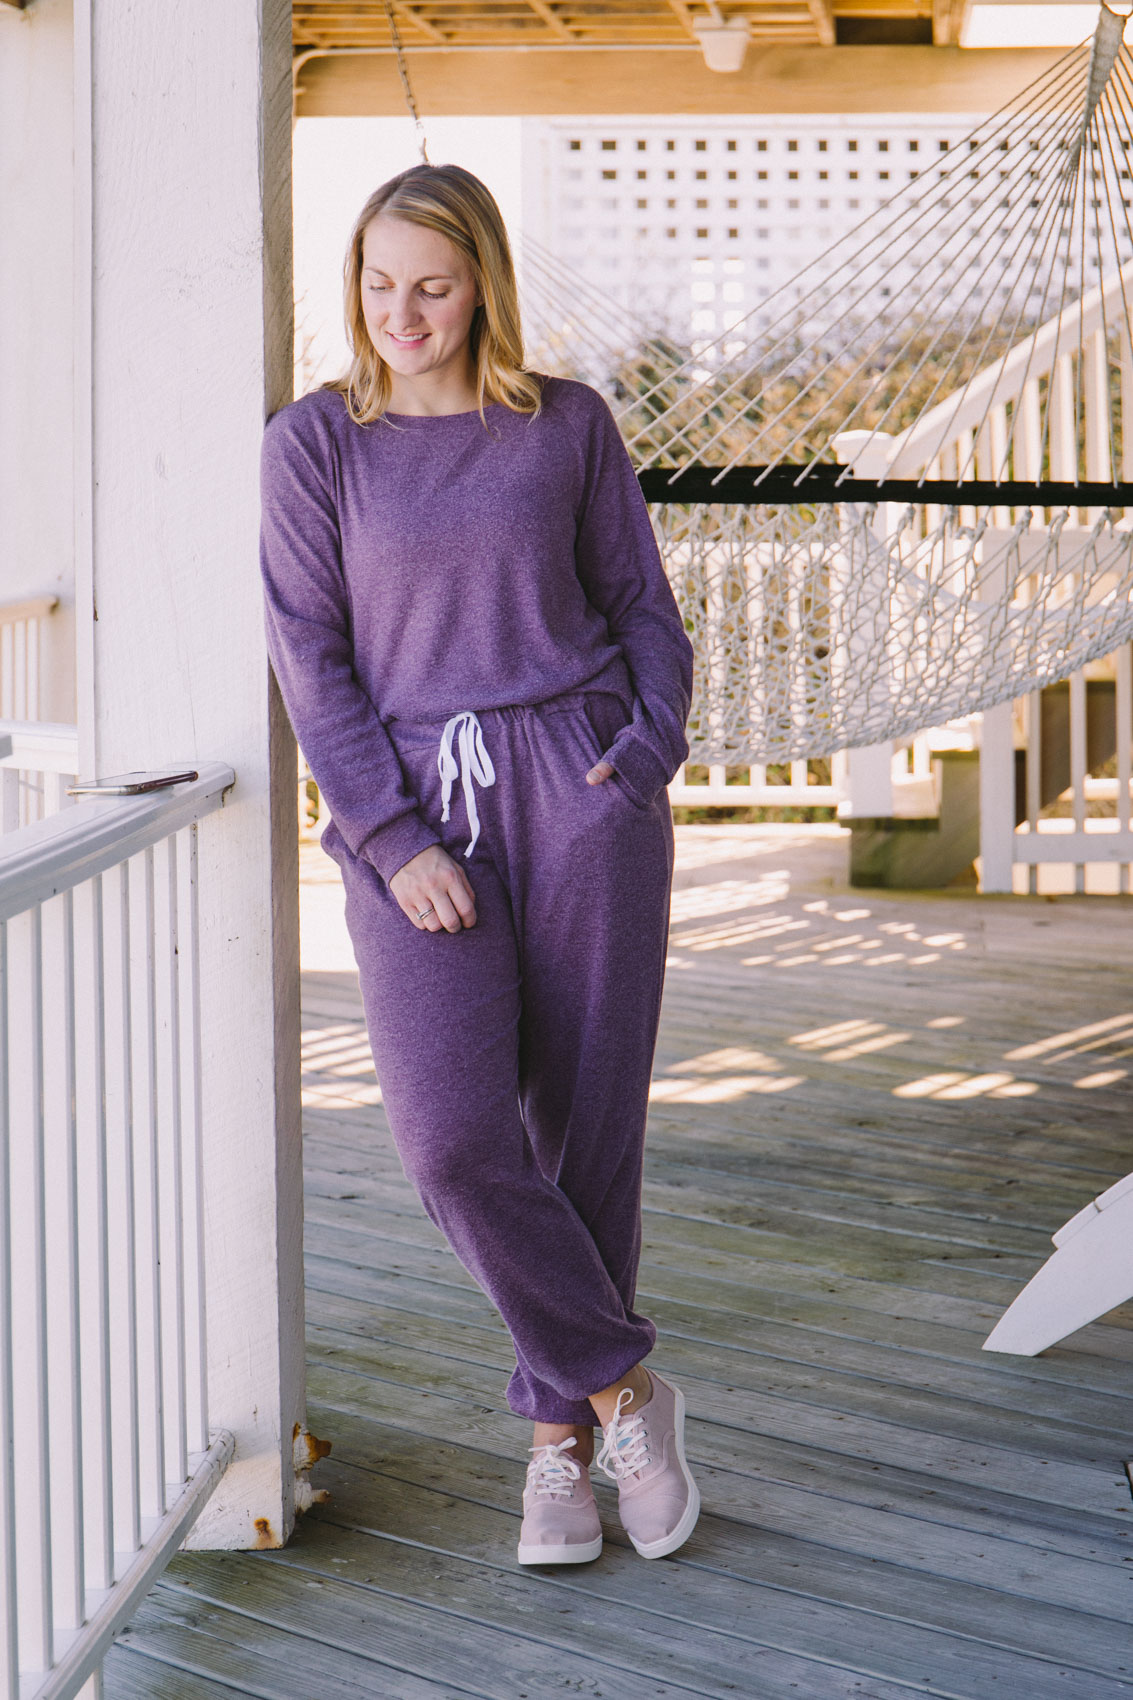 Cute Amazon loungewear outfit featuring purple sweatsuit and pink sneakers